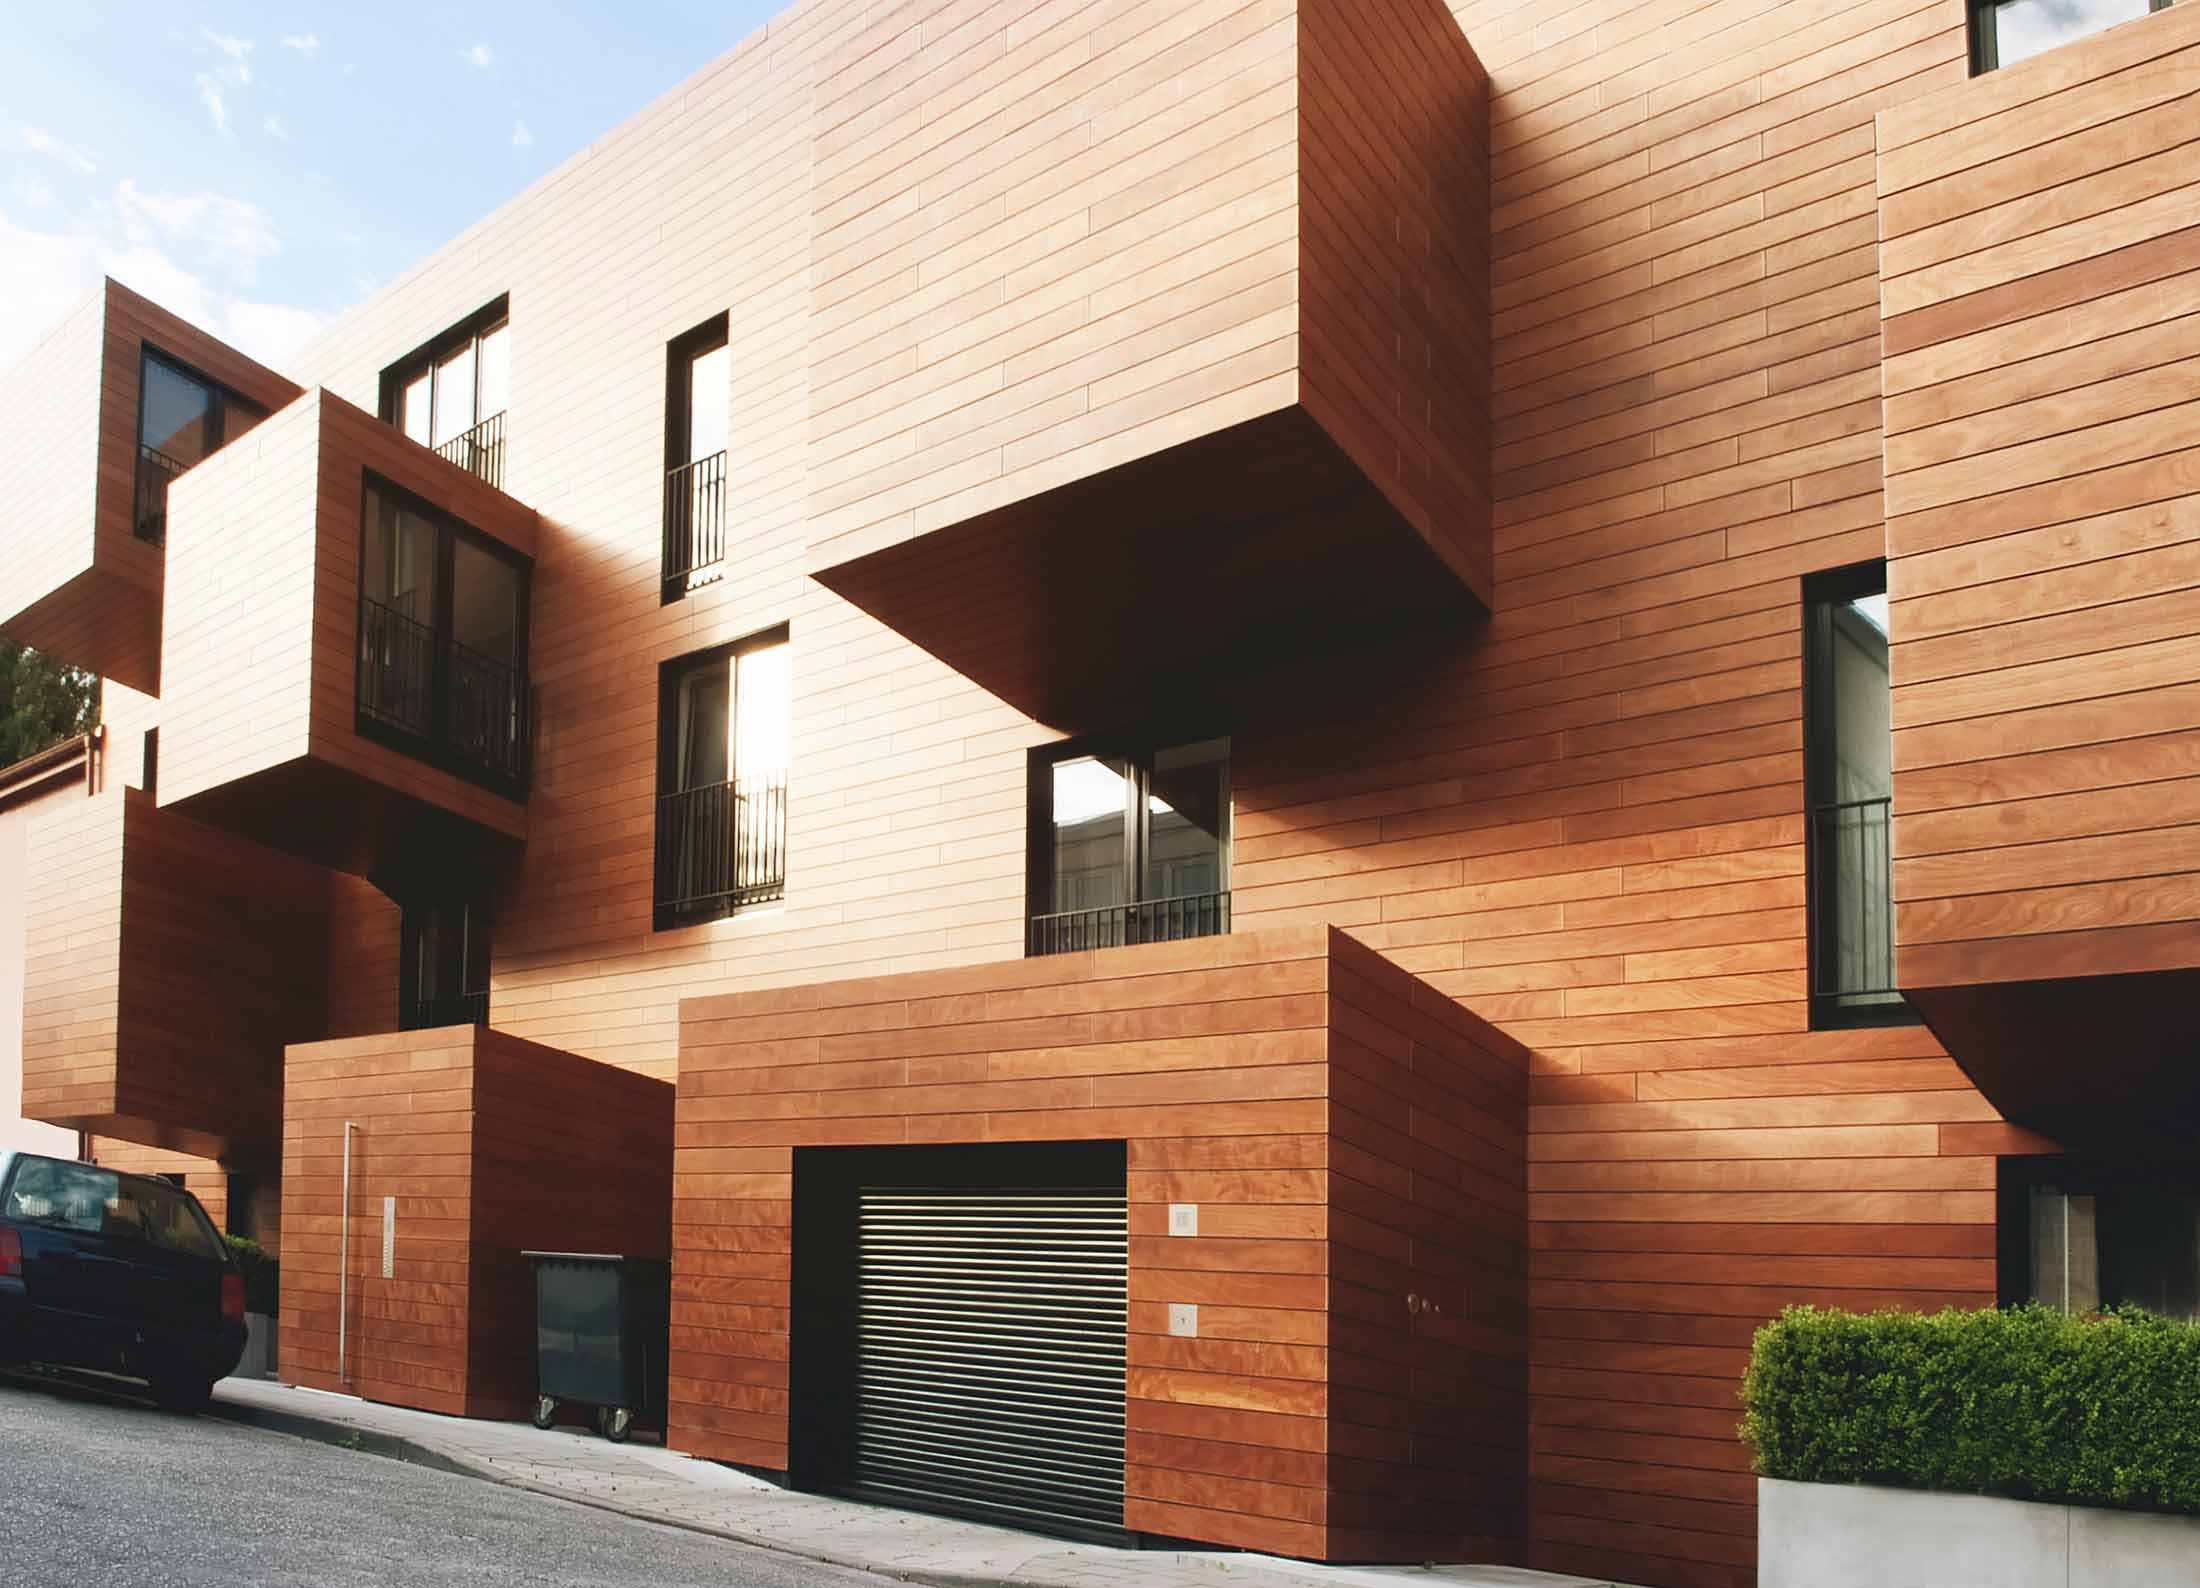 A wooden and modern design for an apartment building.